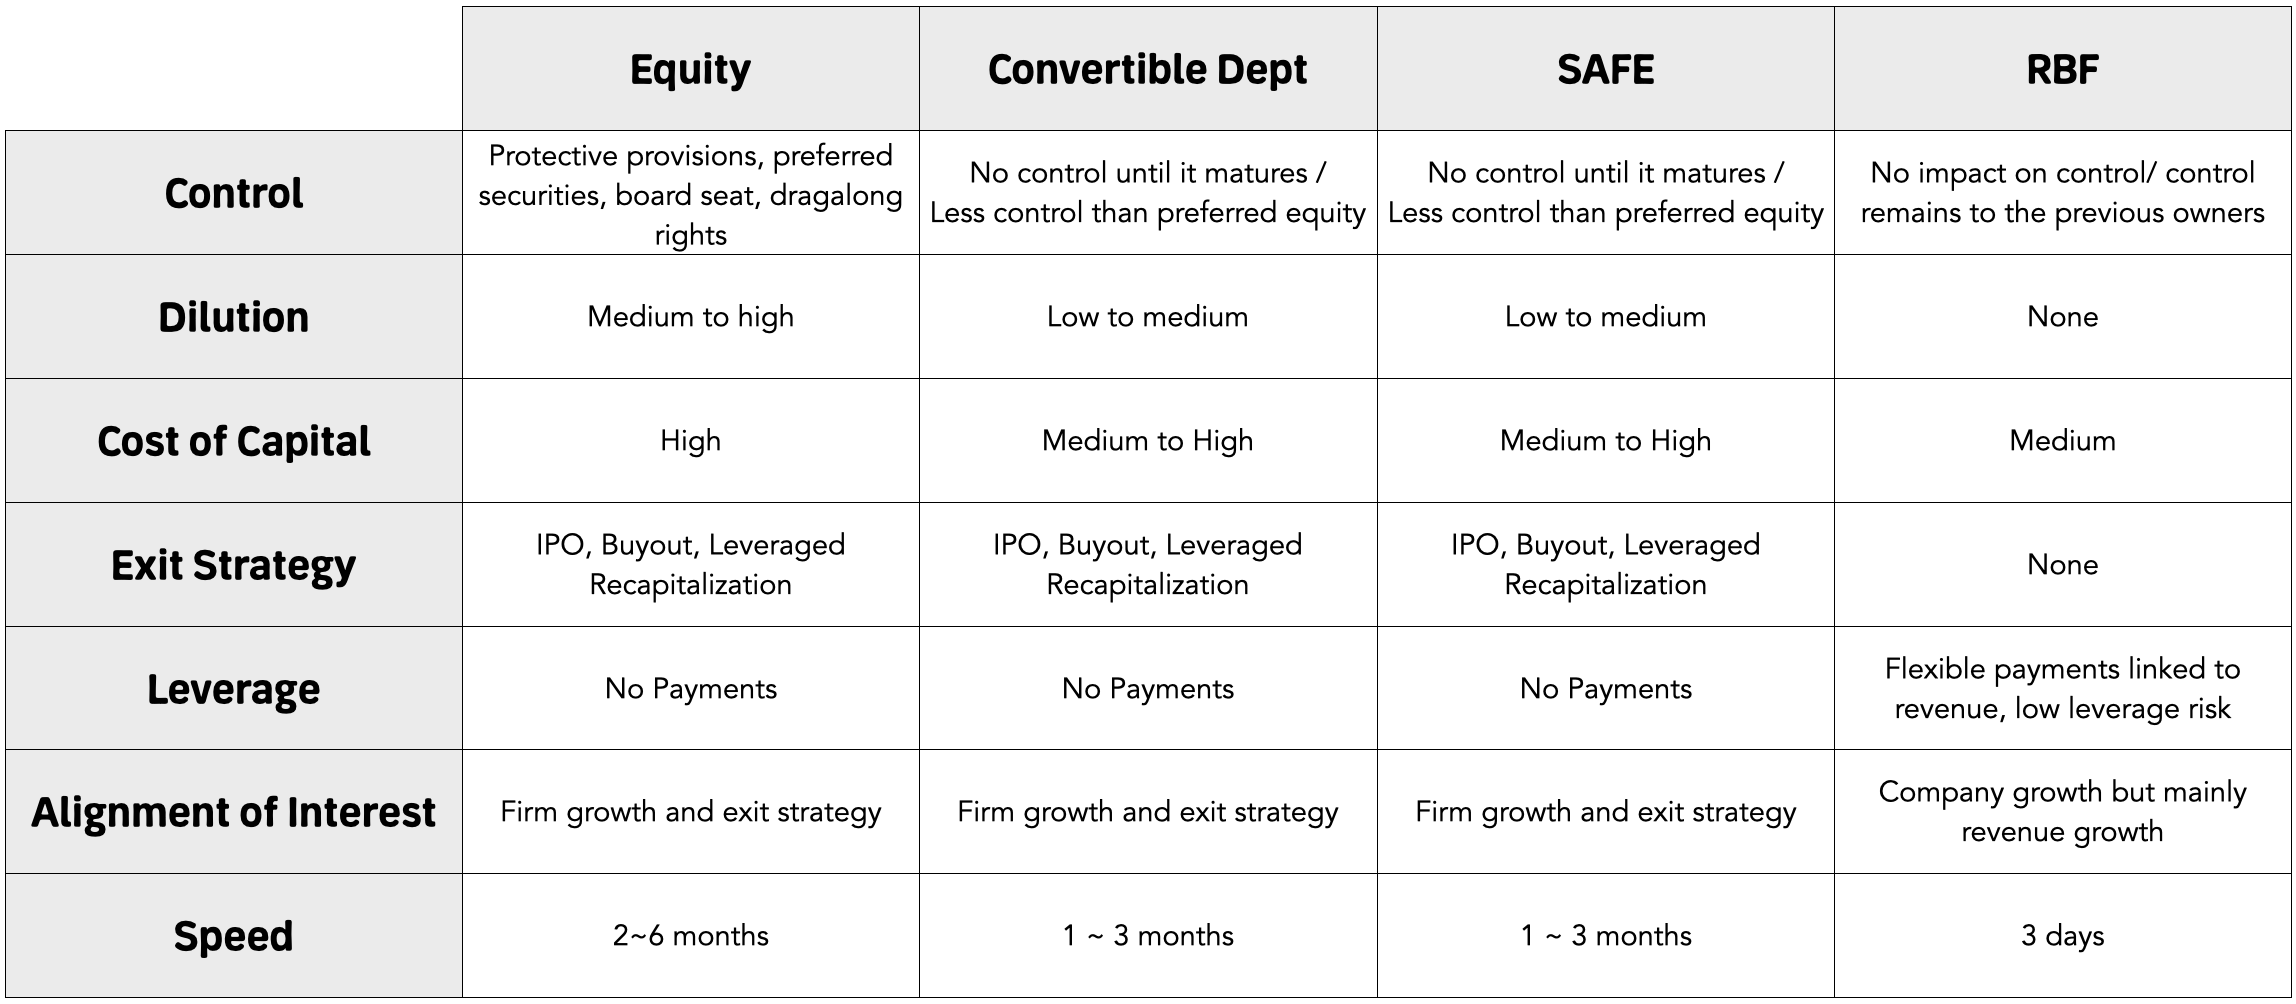 Comparison between equity, convertible debt, SAFE, and RBF